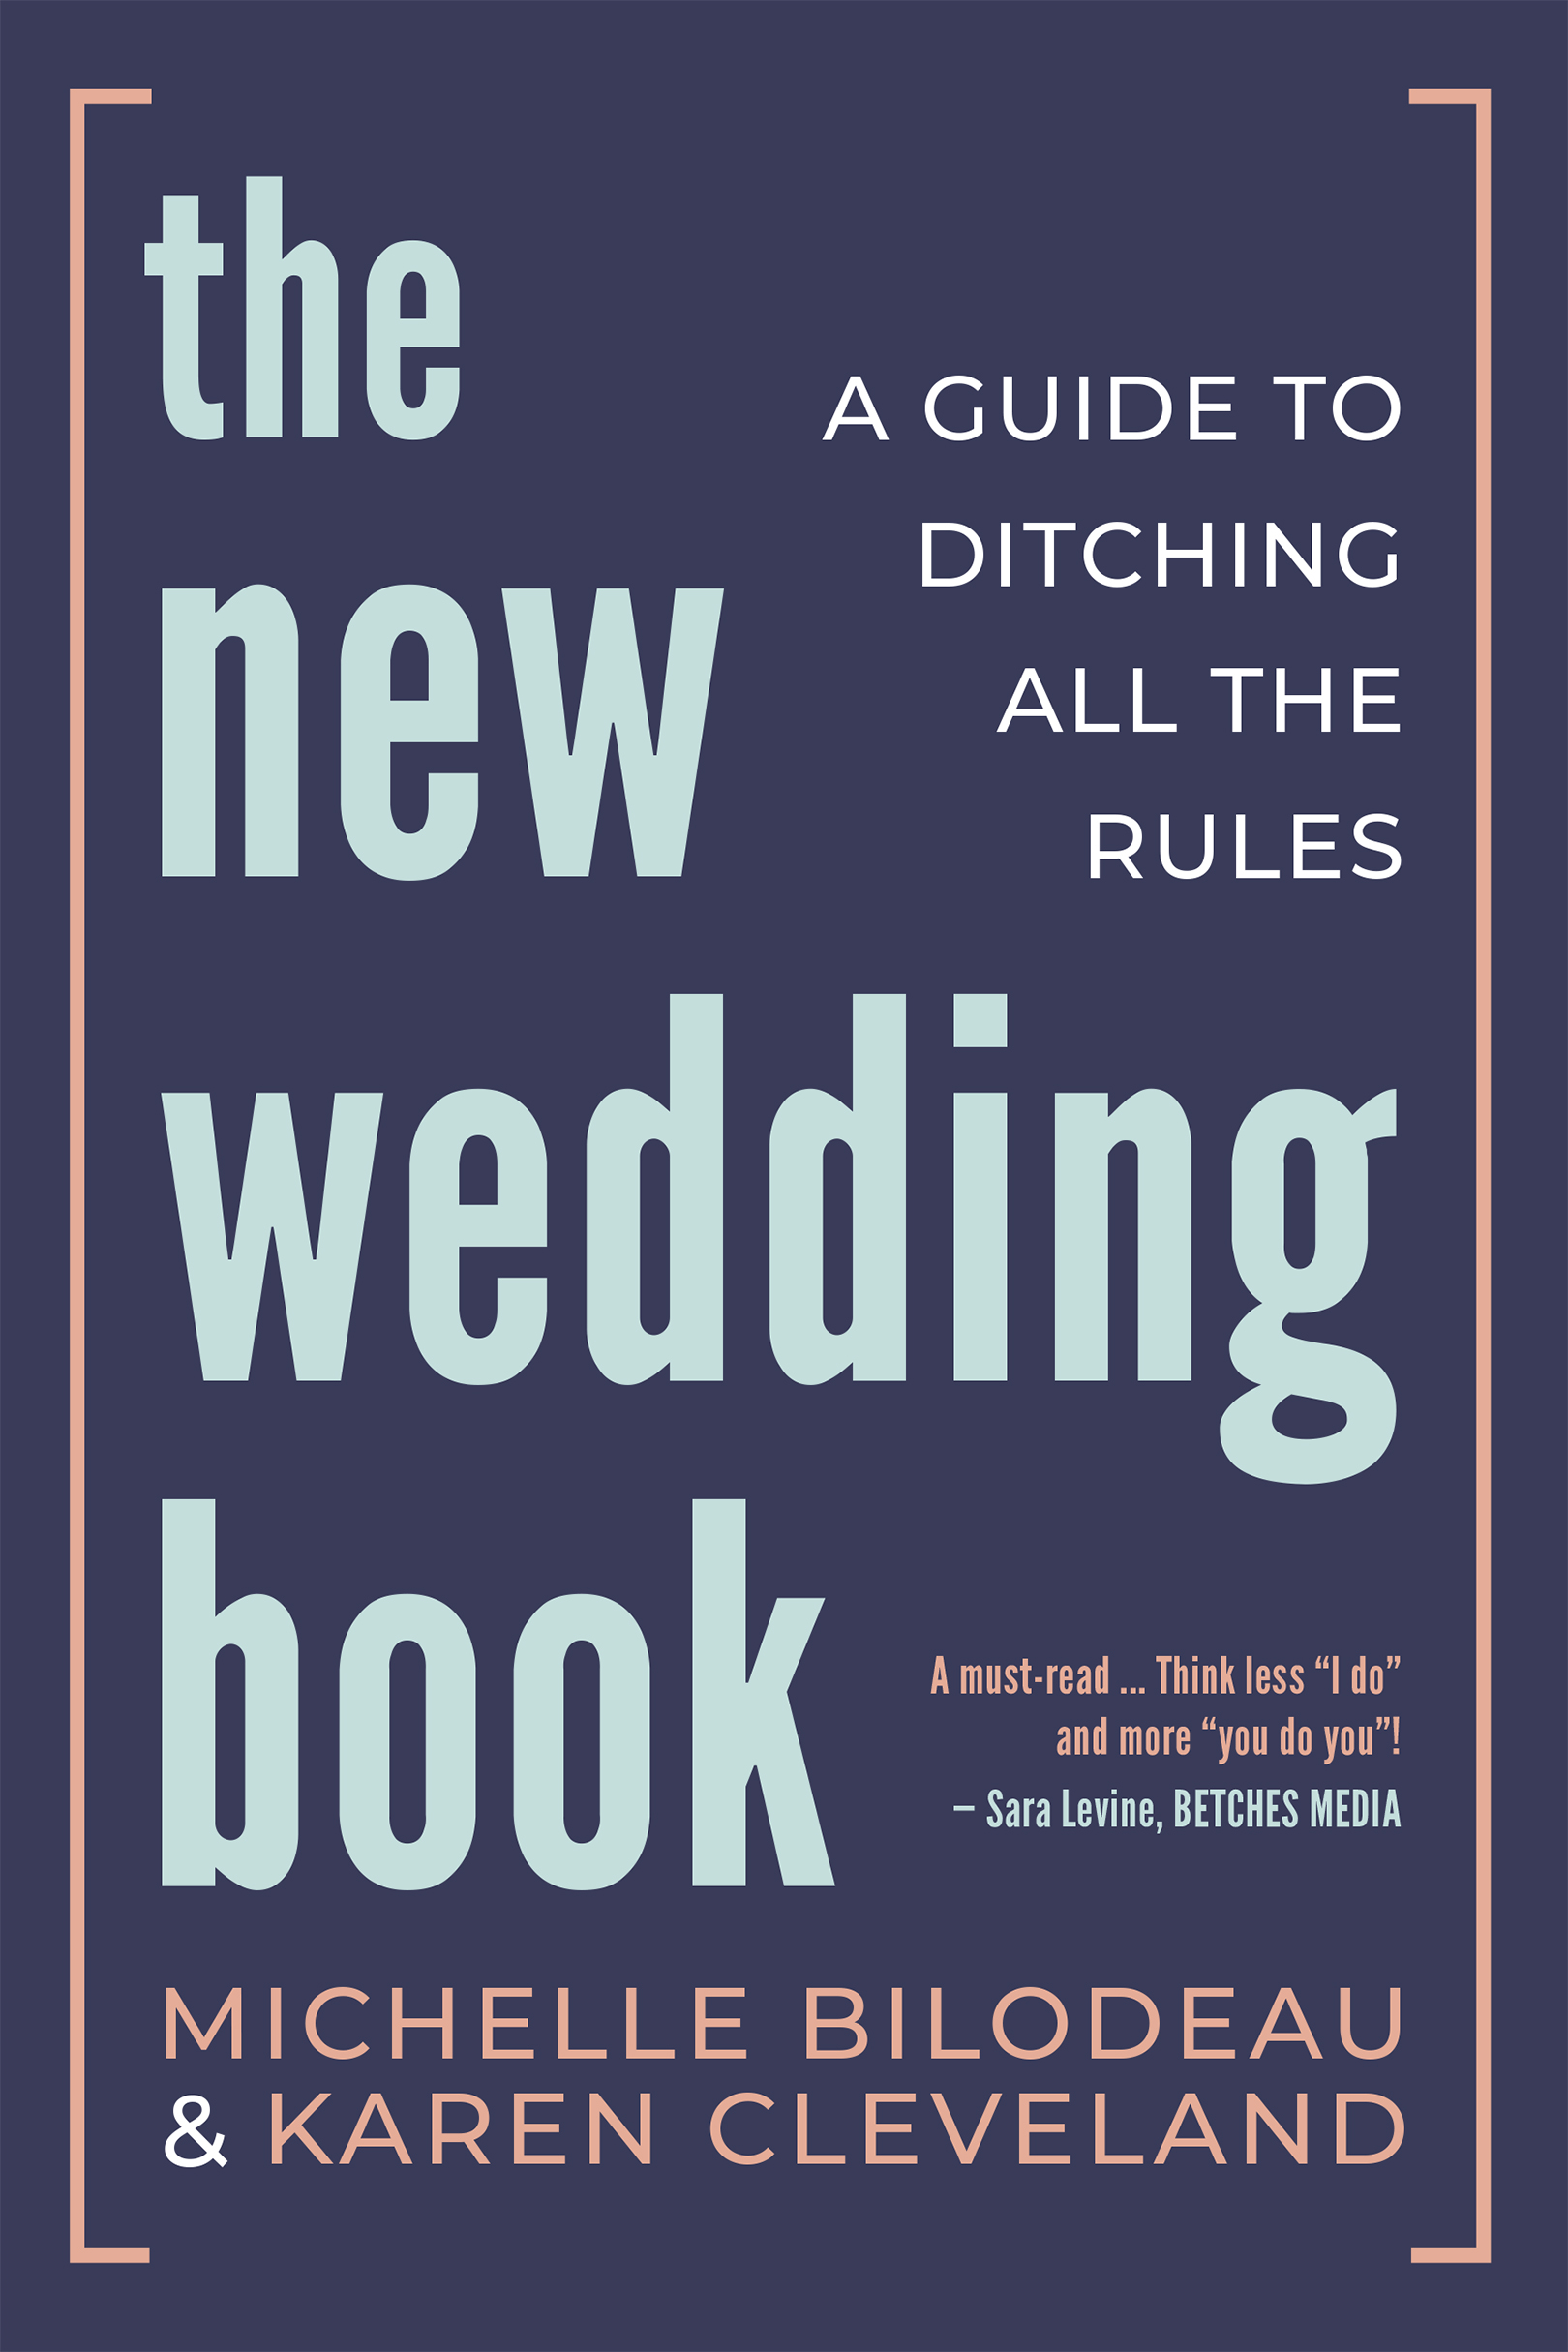 New Wedding Book : A Guide to Ditching All the Rules (The) | Bilodeau, Michelle